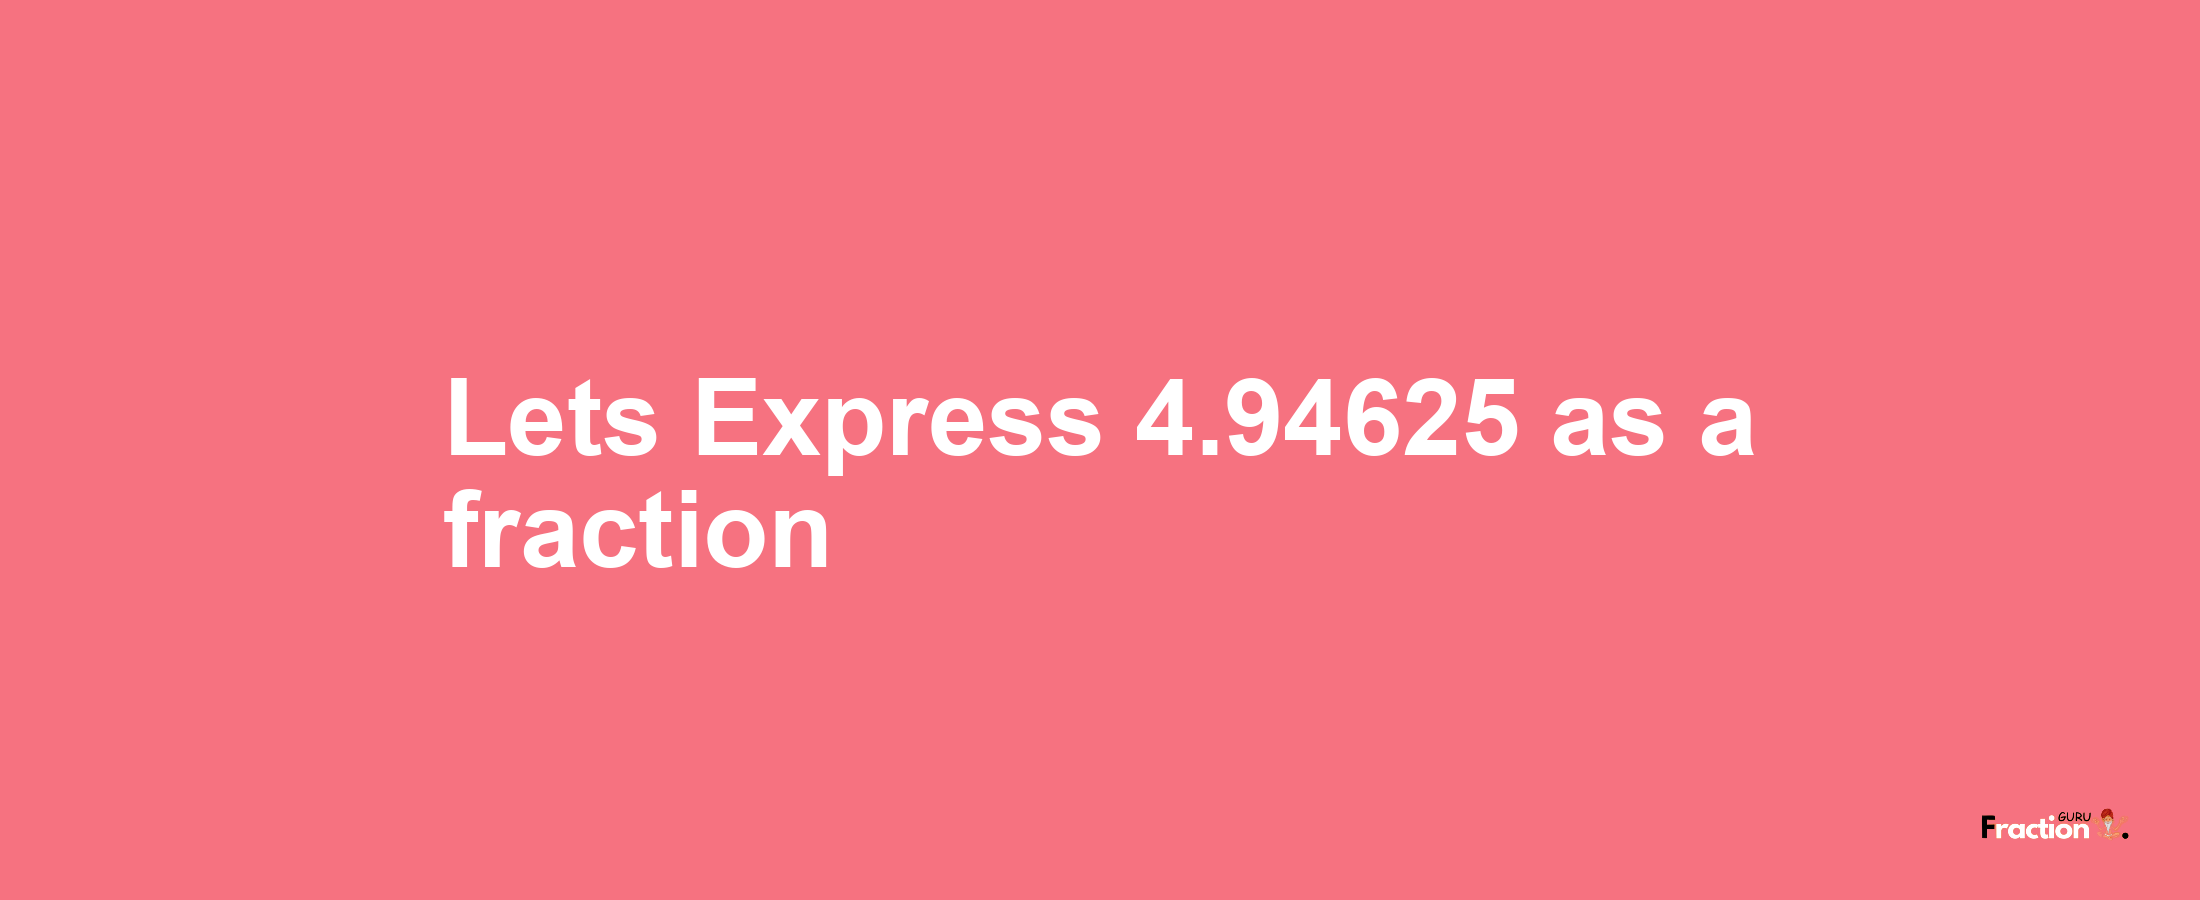 Lets Express 4.94625 as afraction